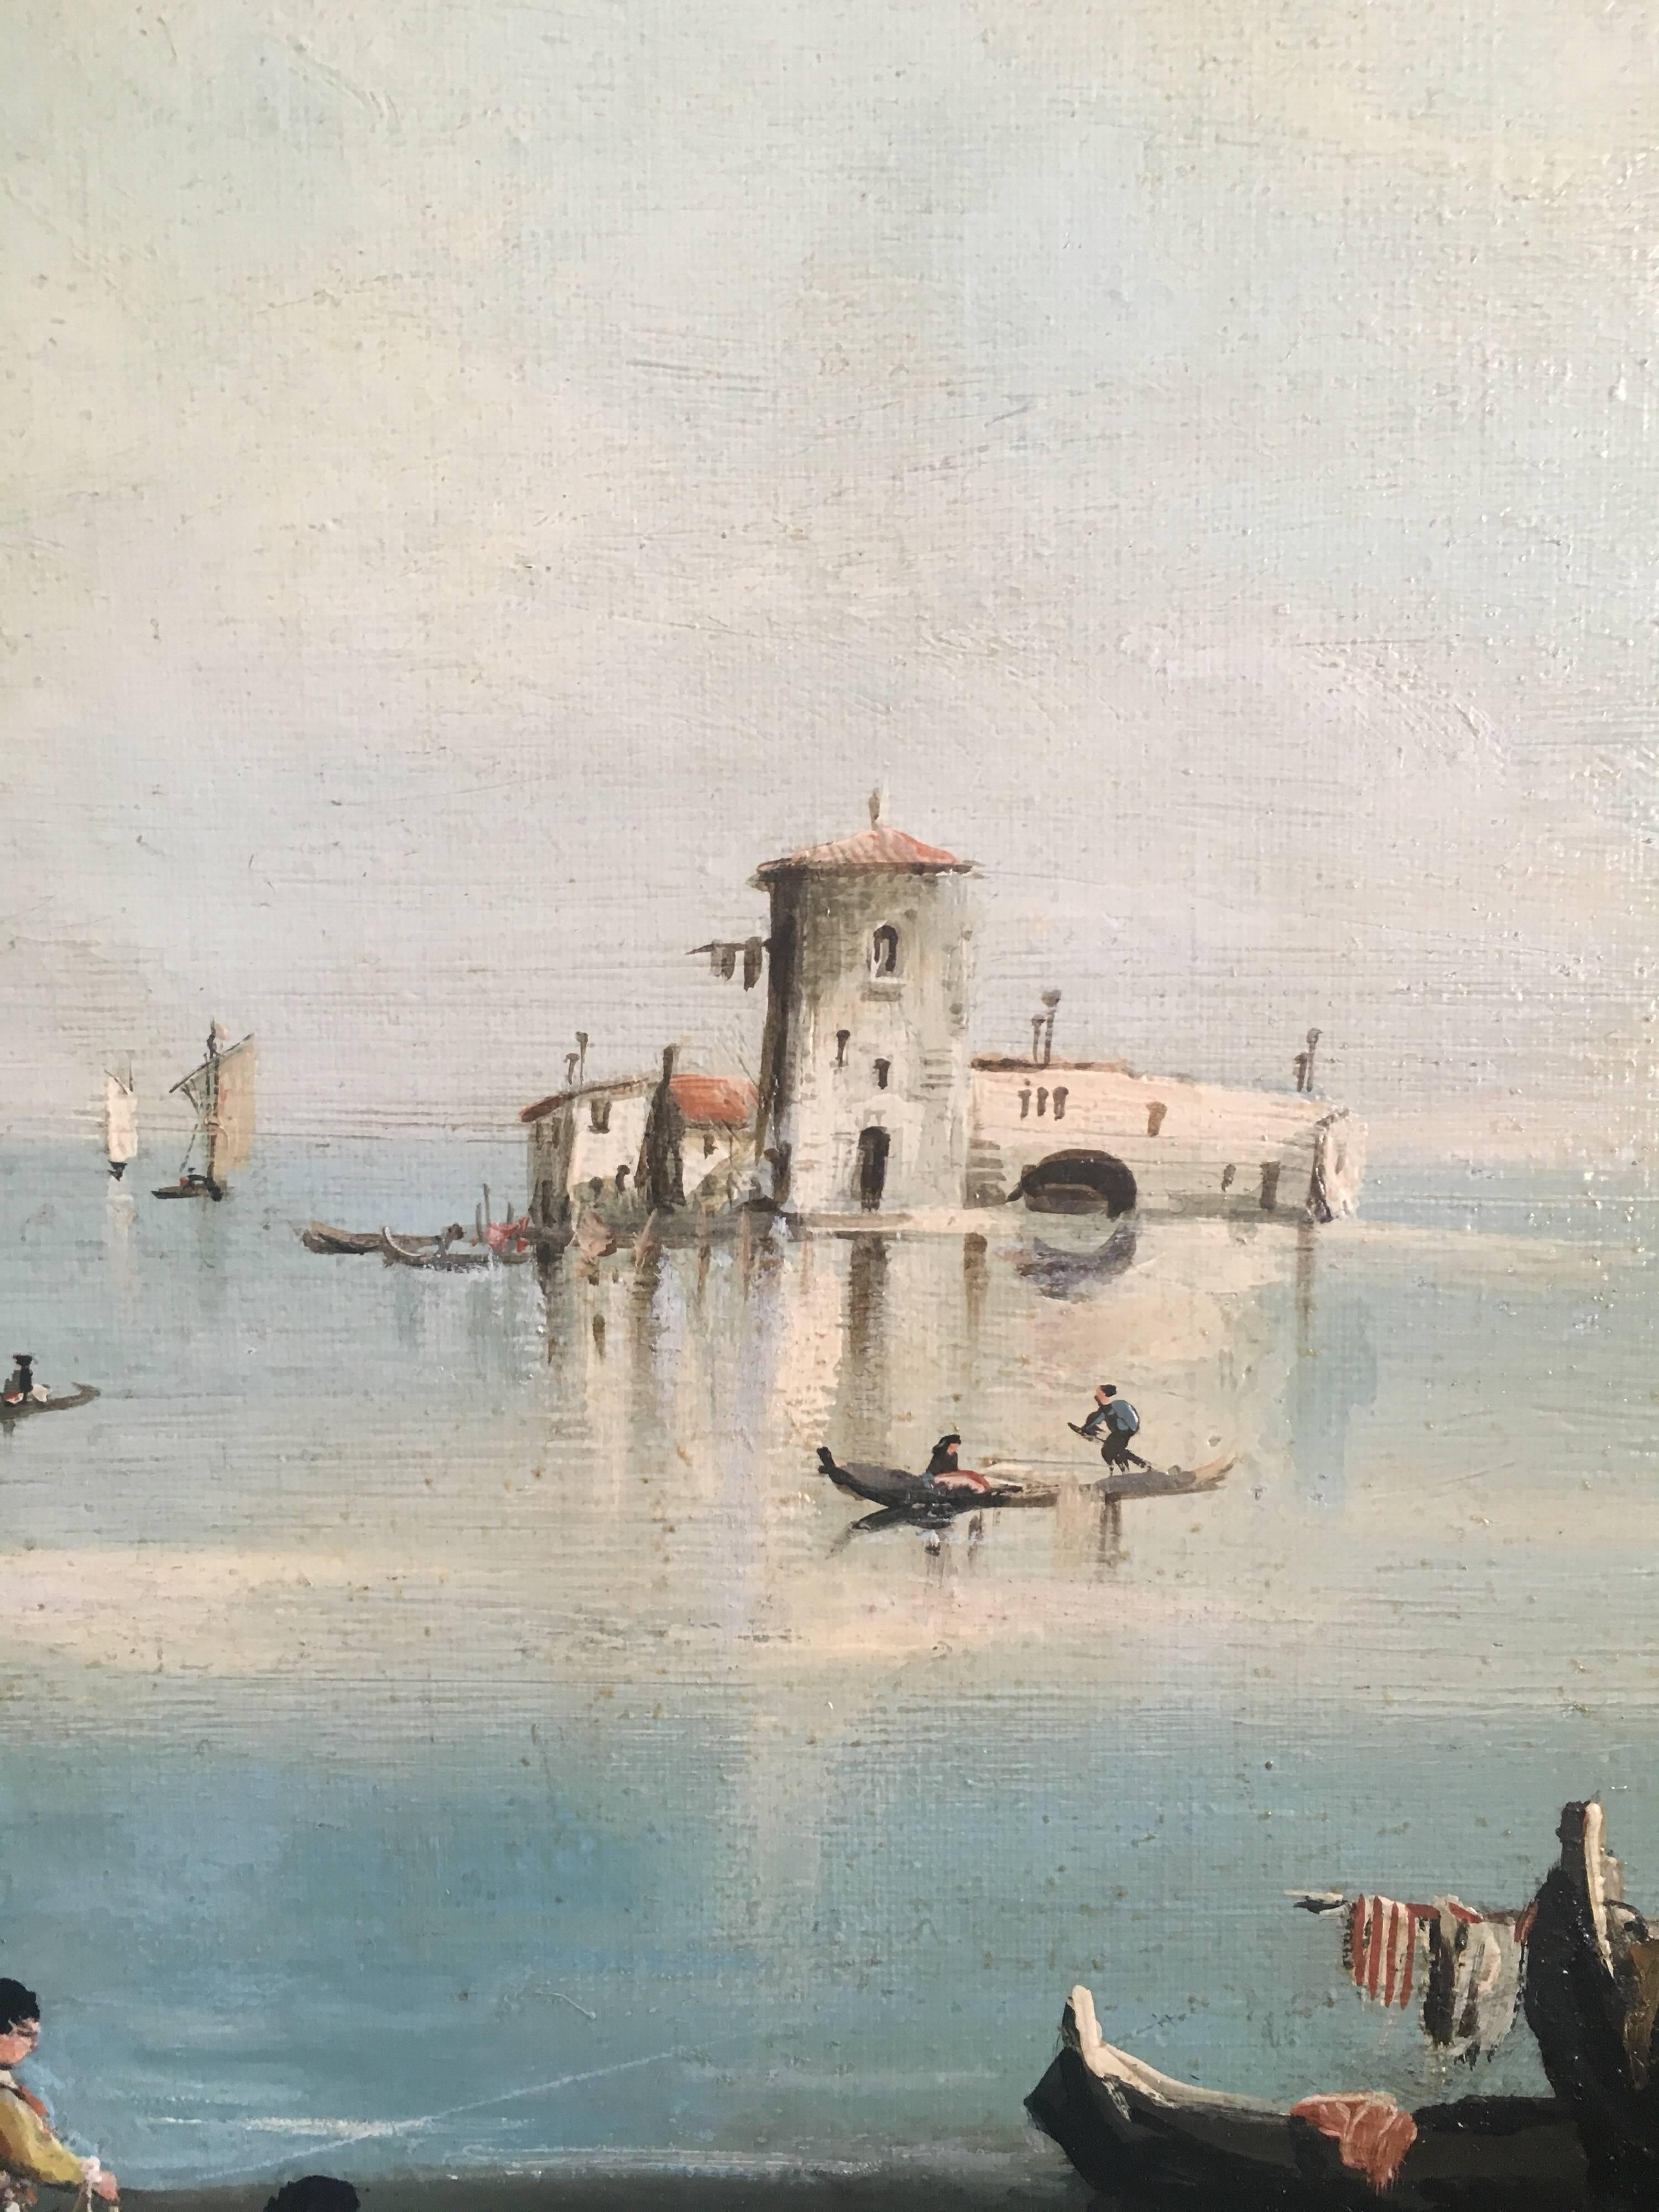 Fishermen on the Venetian Lagoon
Norman Henry French, Mid 20th Century
Oil painting on canvas, framed
Signed on the lower right hand corner
Framed size: 24 x 28 inches

Classical depiction of fishermen on the Venetian lagoon with surrounding